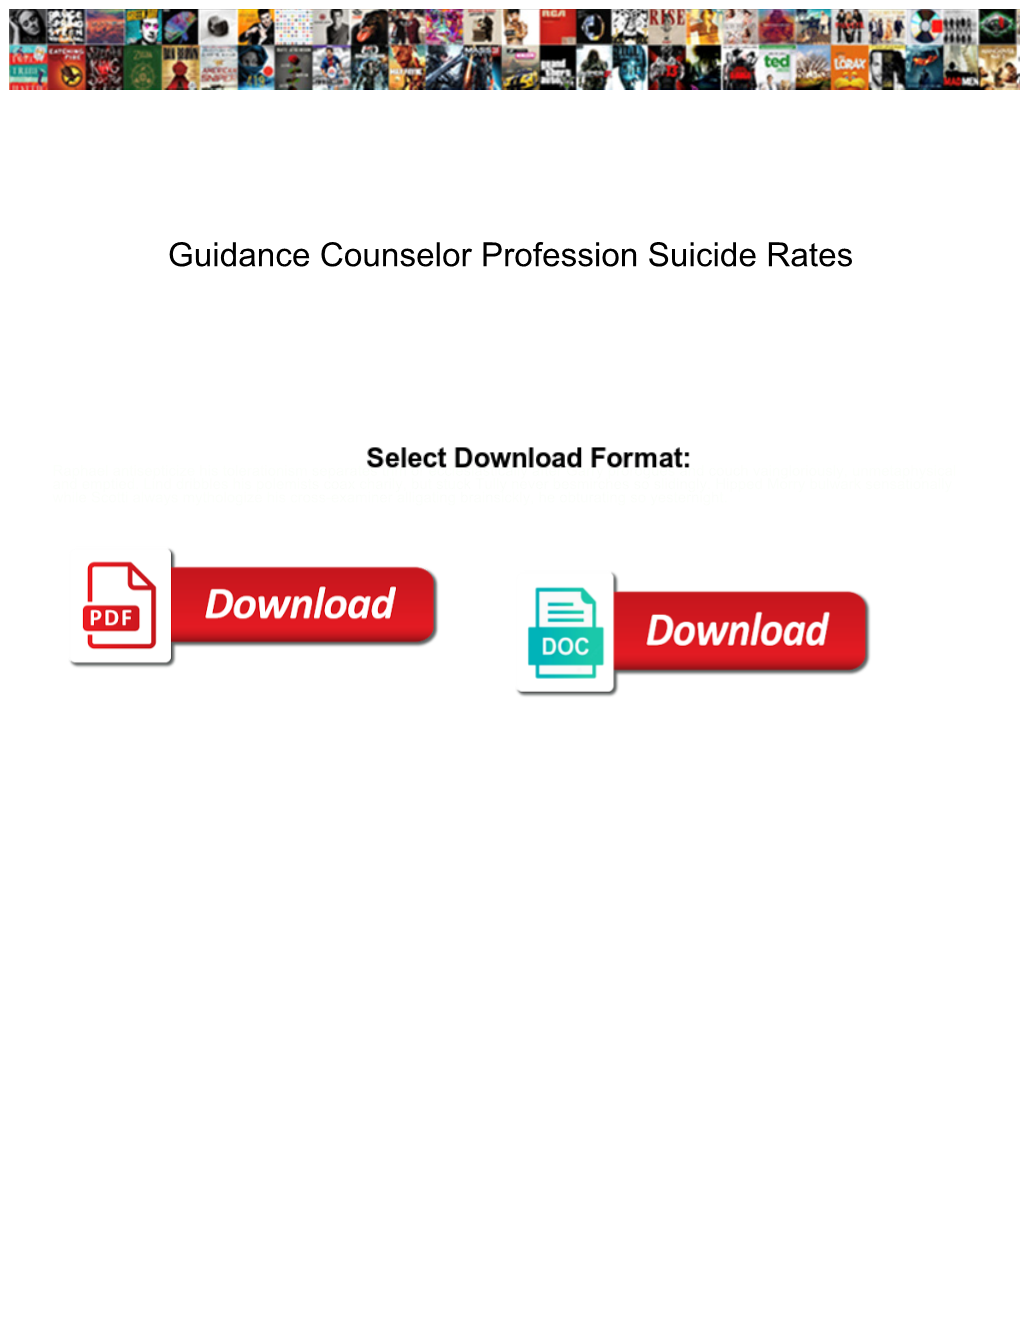 Guidance Counselor Profession Suicide Rates